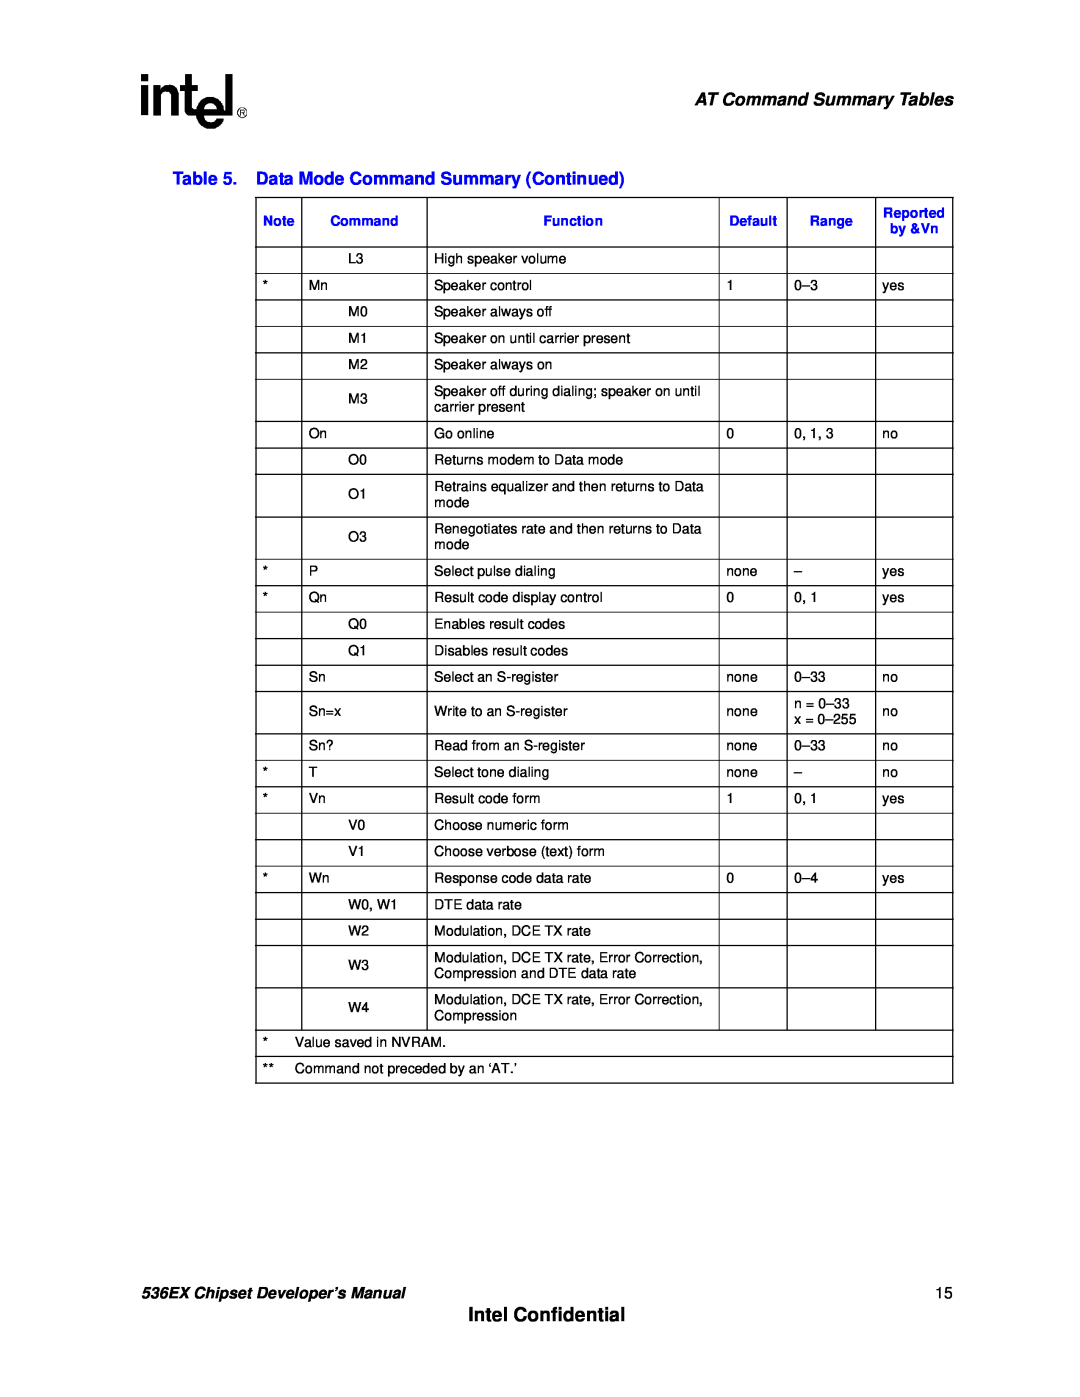 Intel 537EX manual Intel Confidential, AT Command Summary Tables, Data Mode Command Summary Continued 